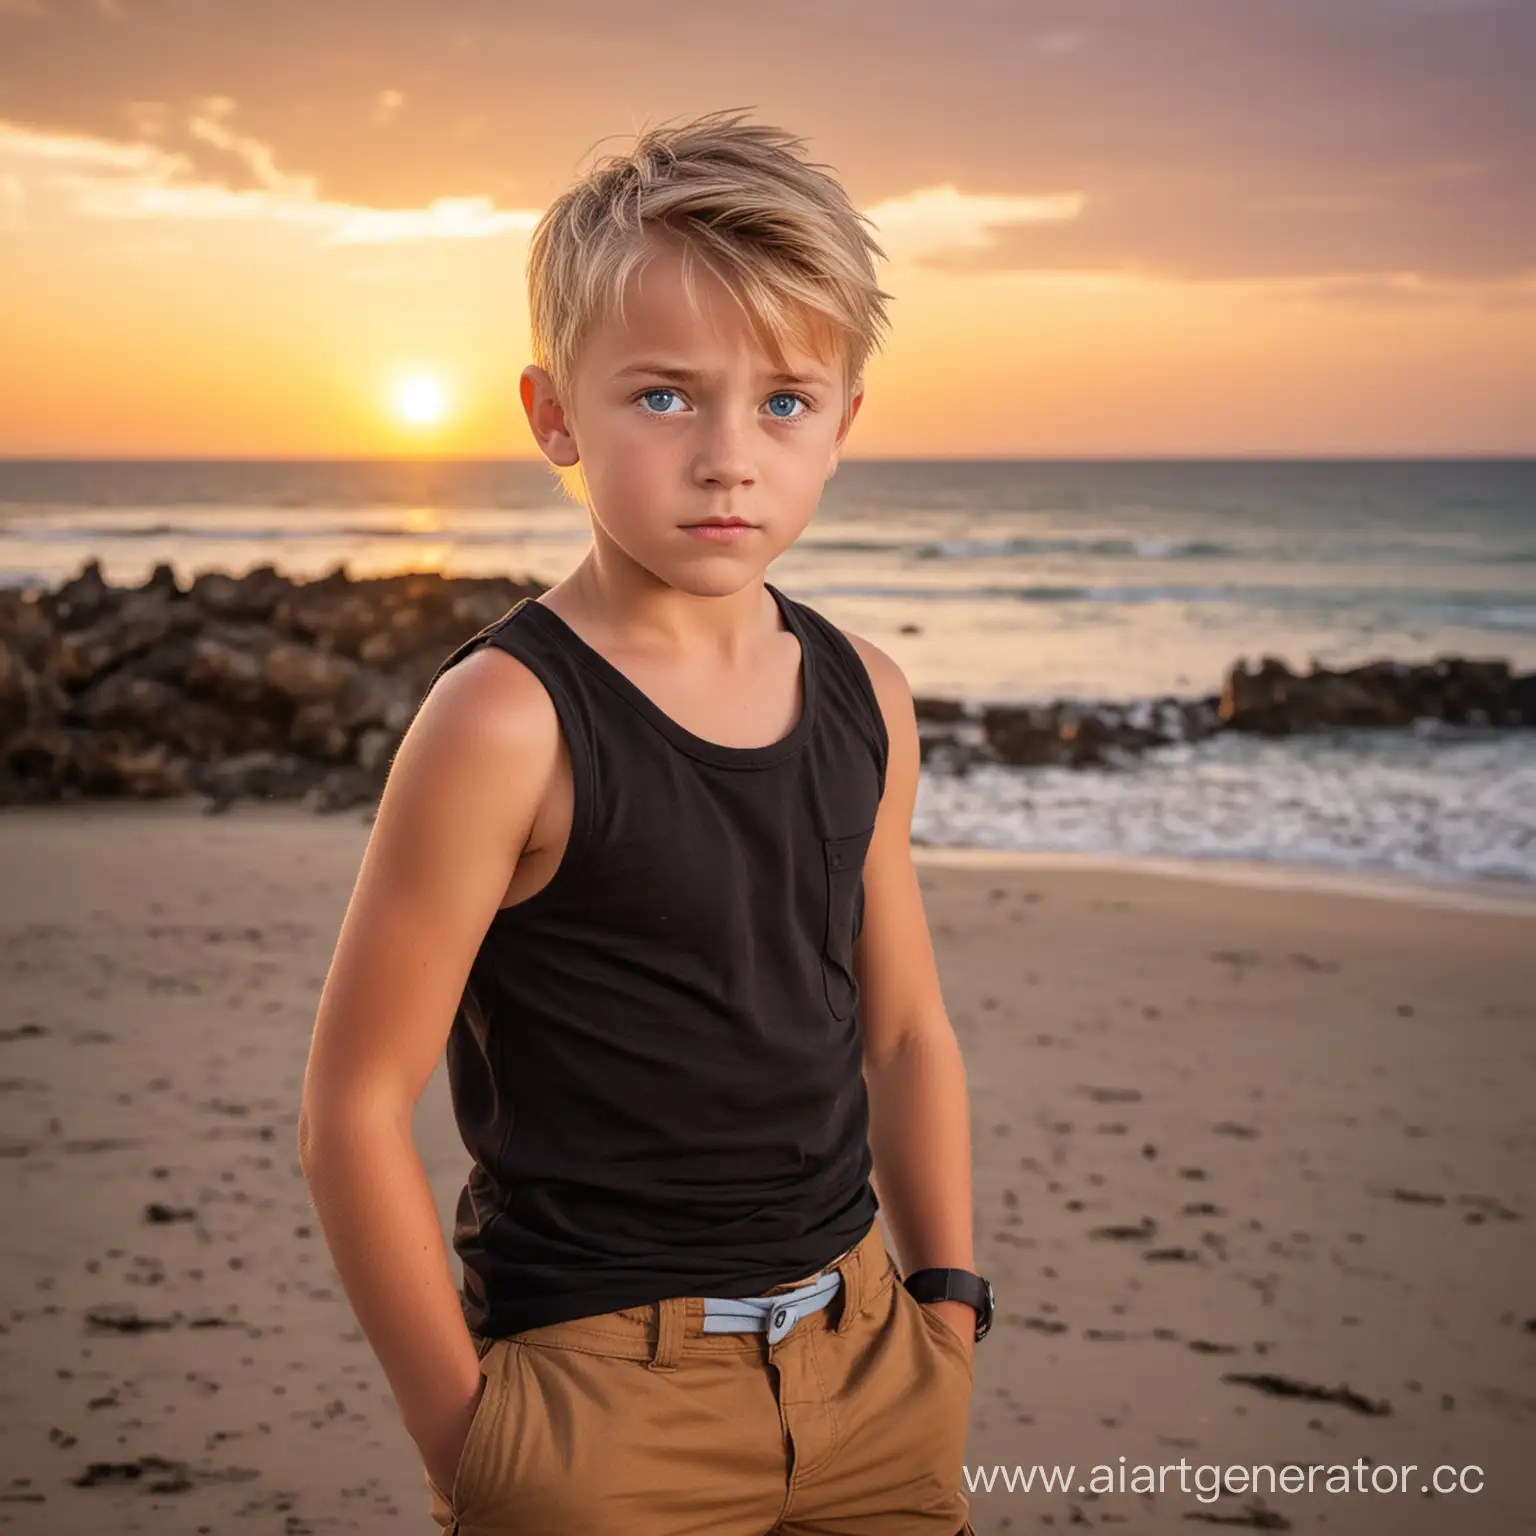 Cute boy with blonde hair and expressive blue eyes, serious expression, wearing a black tank shirt, brown cargo pants, flexing, beach background, dramatic sunset lighting